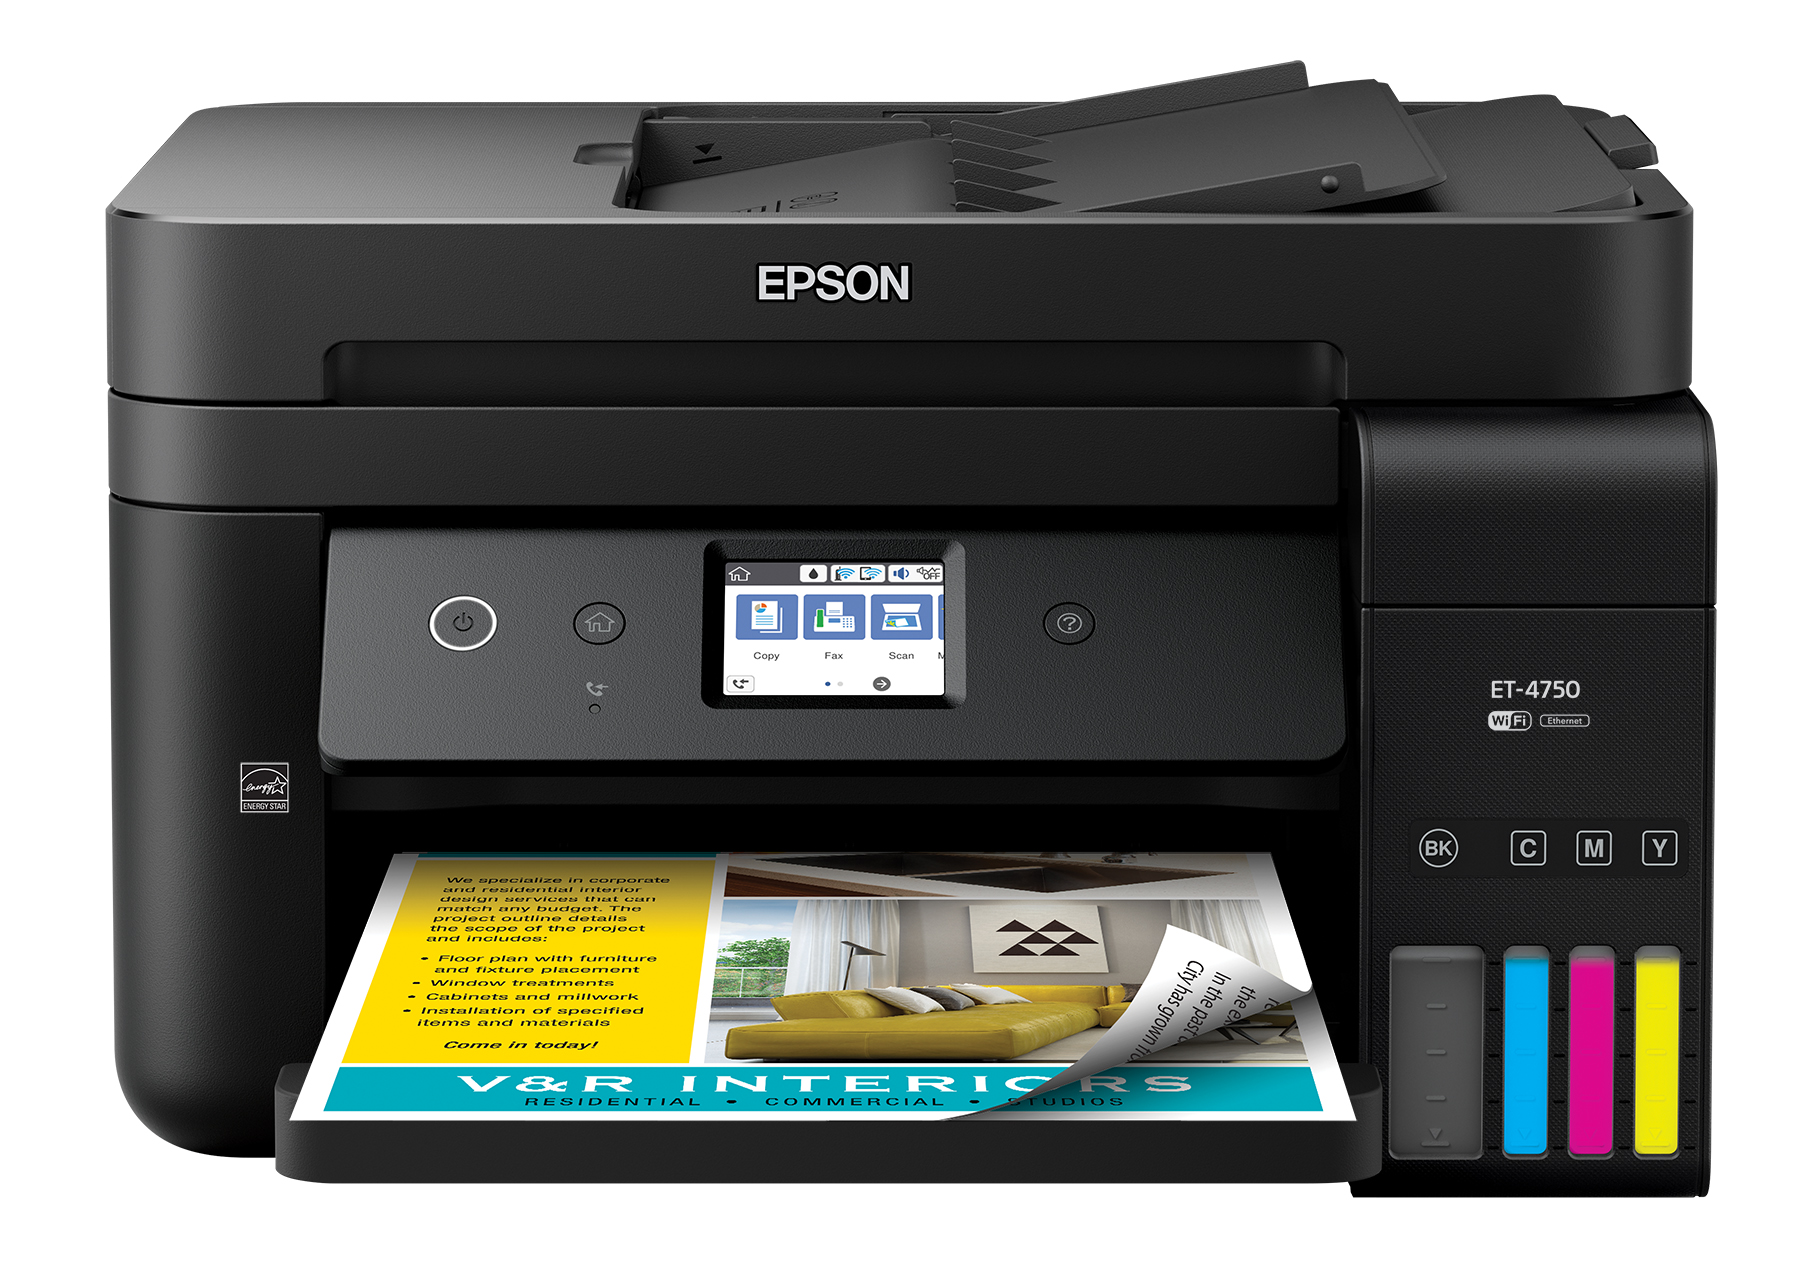 WorkForce ET-4750 EcoTank features cartridge-free printing with easy-to-fill, supersized ink tanks and includes up to two years of ink in the box – enough to print up to 11,200 pages in the office.